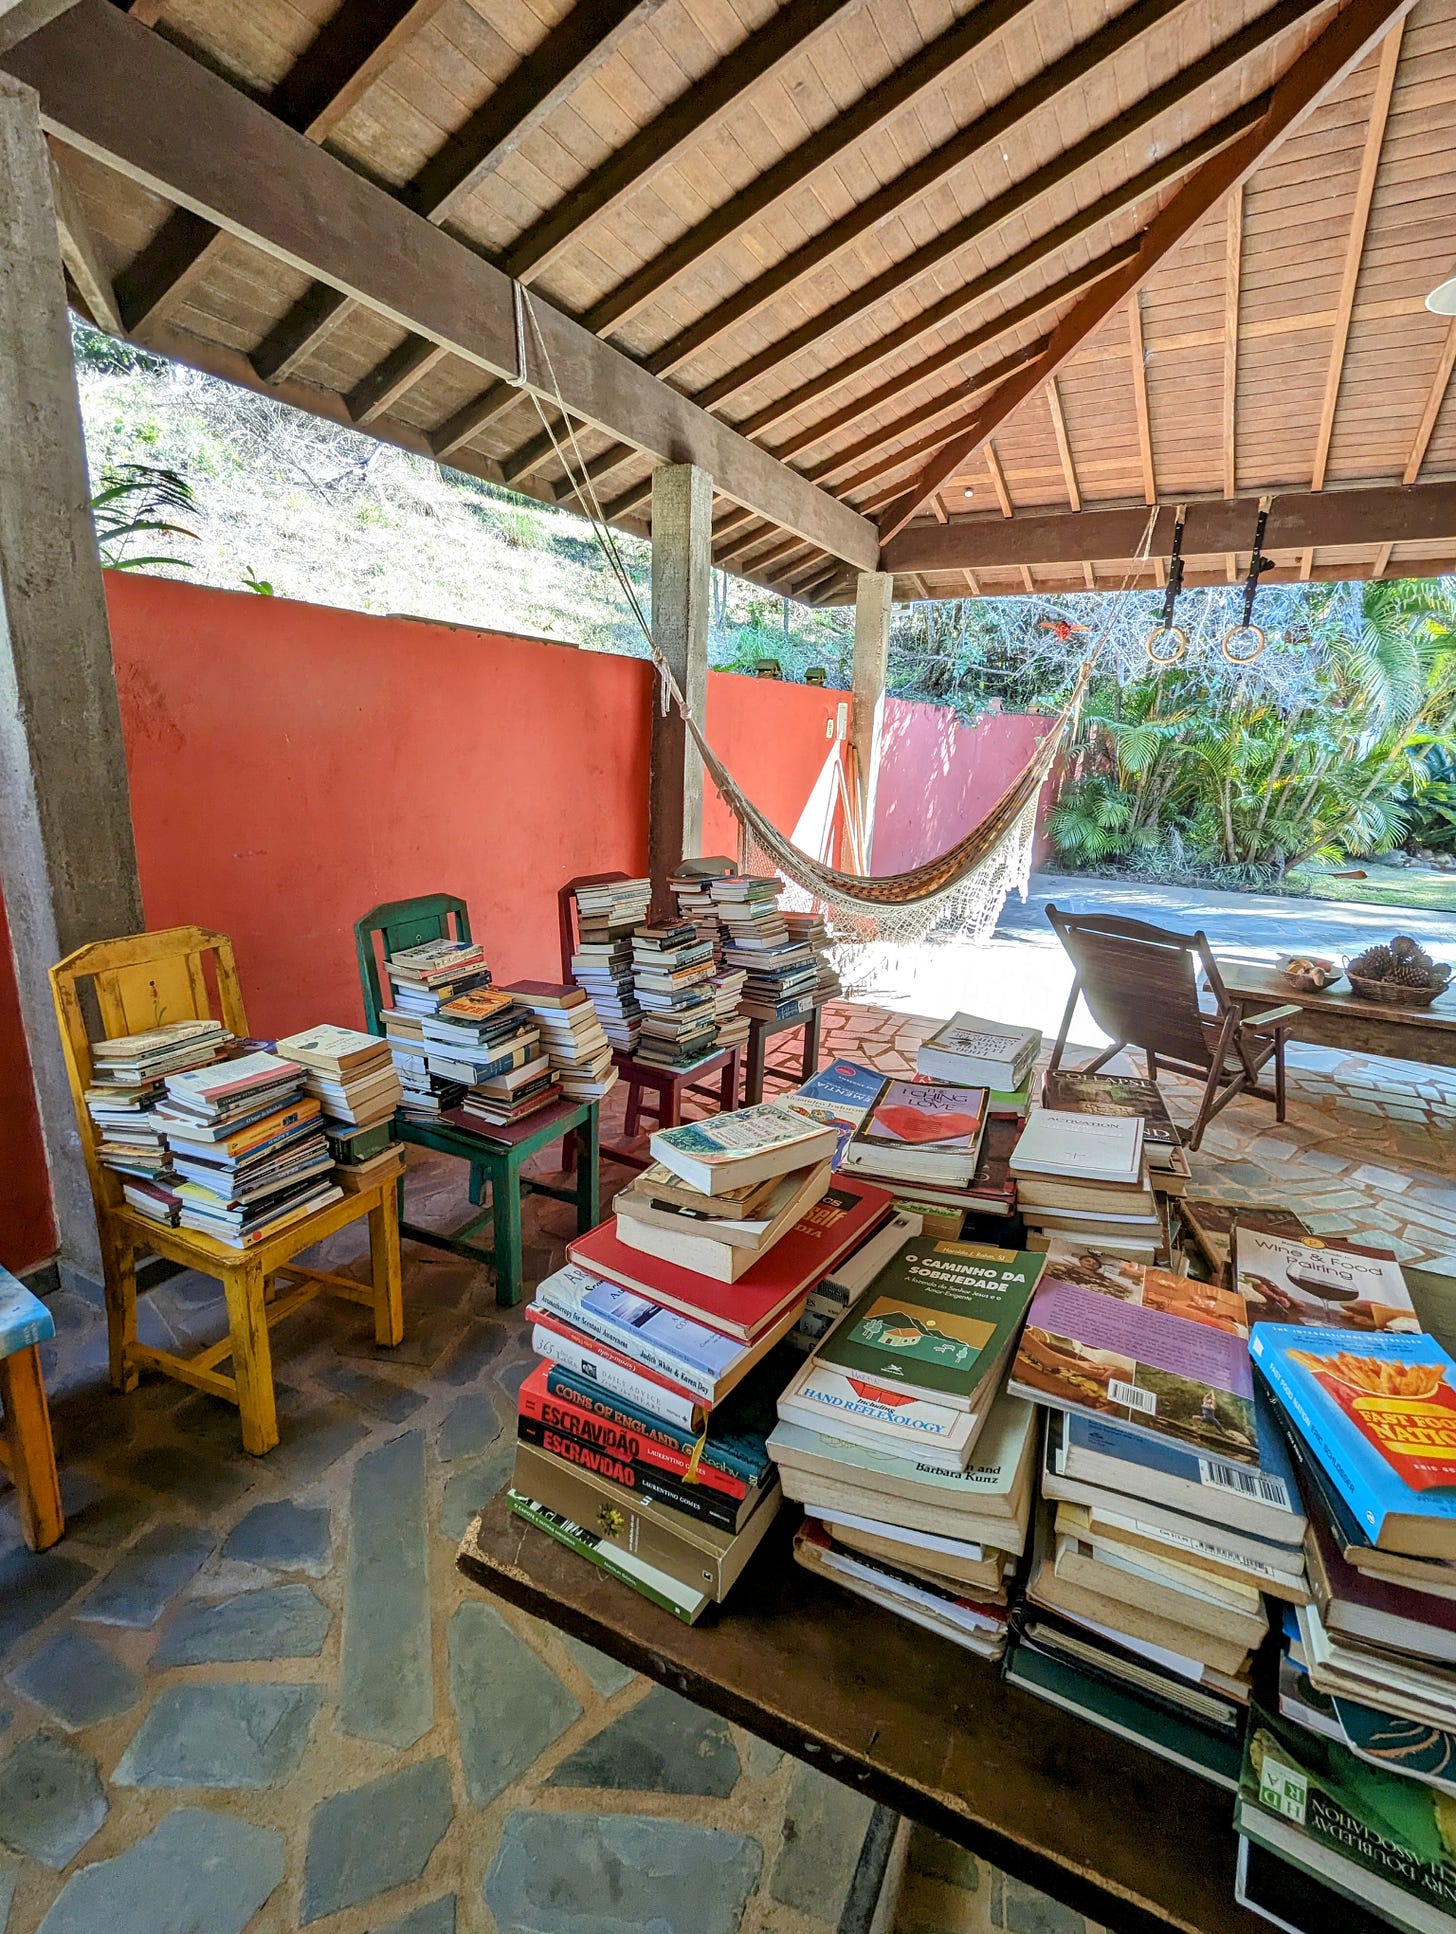 A covered area, with tables, chairs and a hammock, and plenty of greenery and sunshine beyond it. On the table and chairs are piled various books, ready to be wiped clean before being returned to the guesthouse's library.